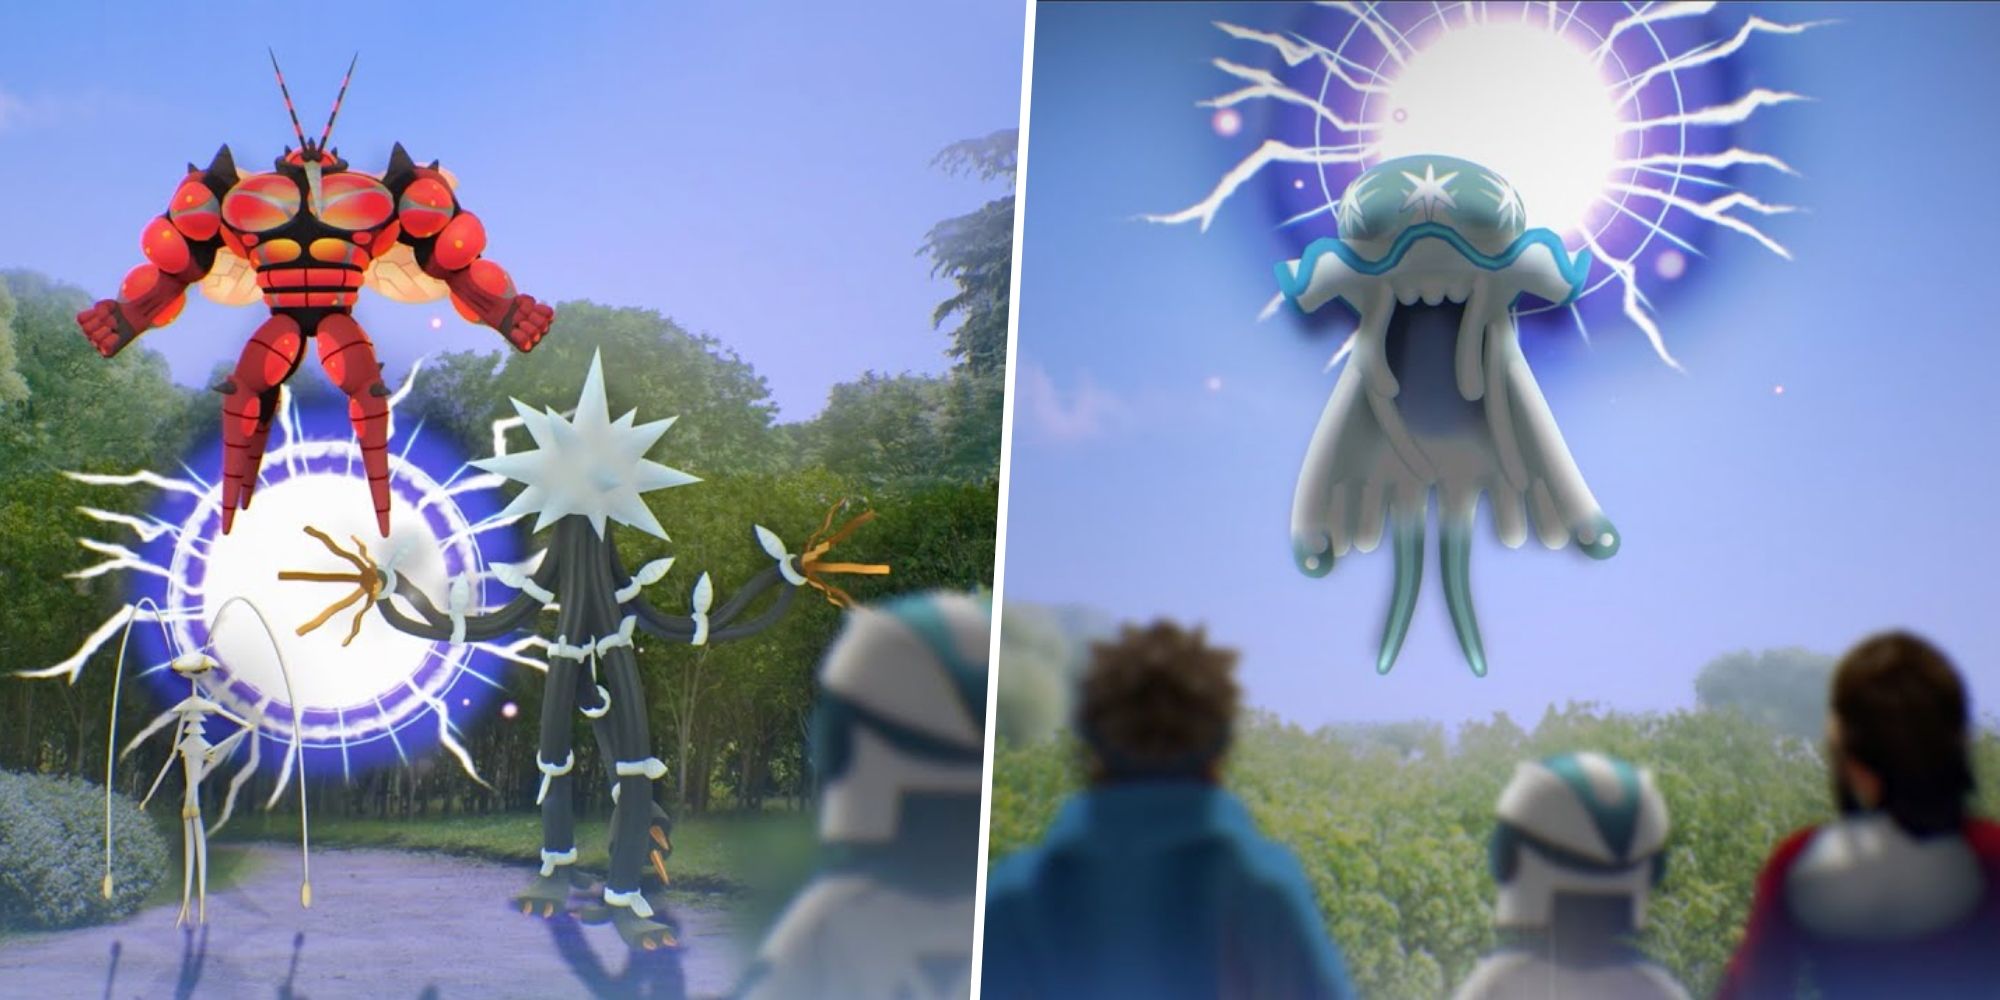 Pokémon Go's mystery event will let you catch all seven Ultra Beasts